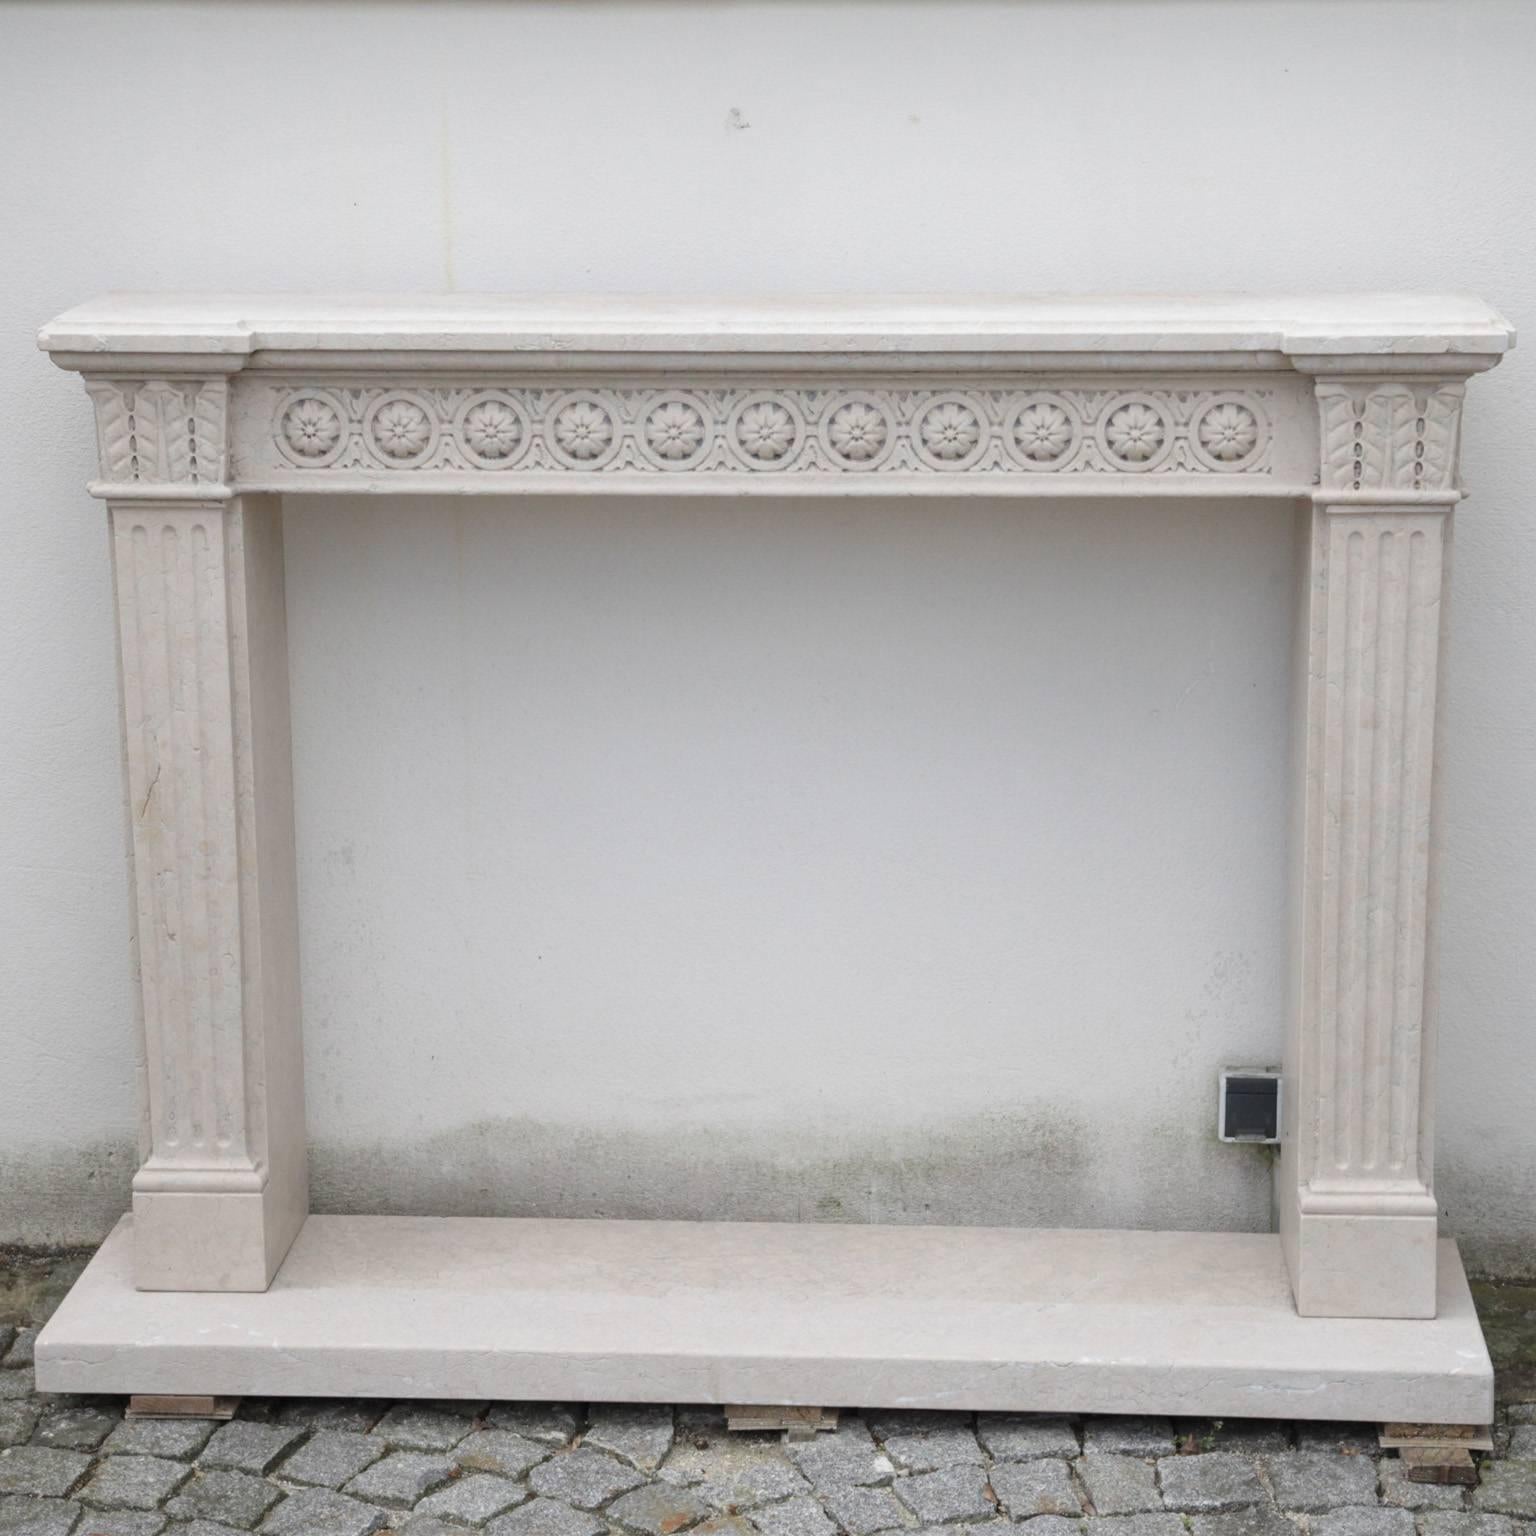 Marble fireplace frame with flower frieze in the top ledge and leaf reliefs on the corners. Two fluted pillars make up either side of the frame and the whole thing stands on a marble plate. The surface is very fine. This piece is a unique